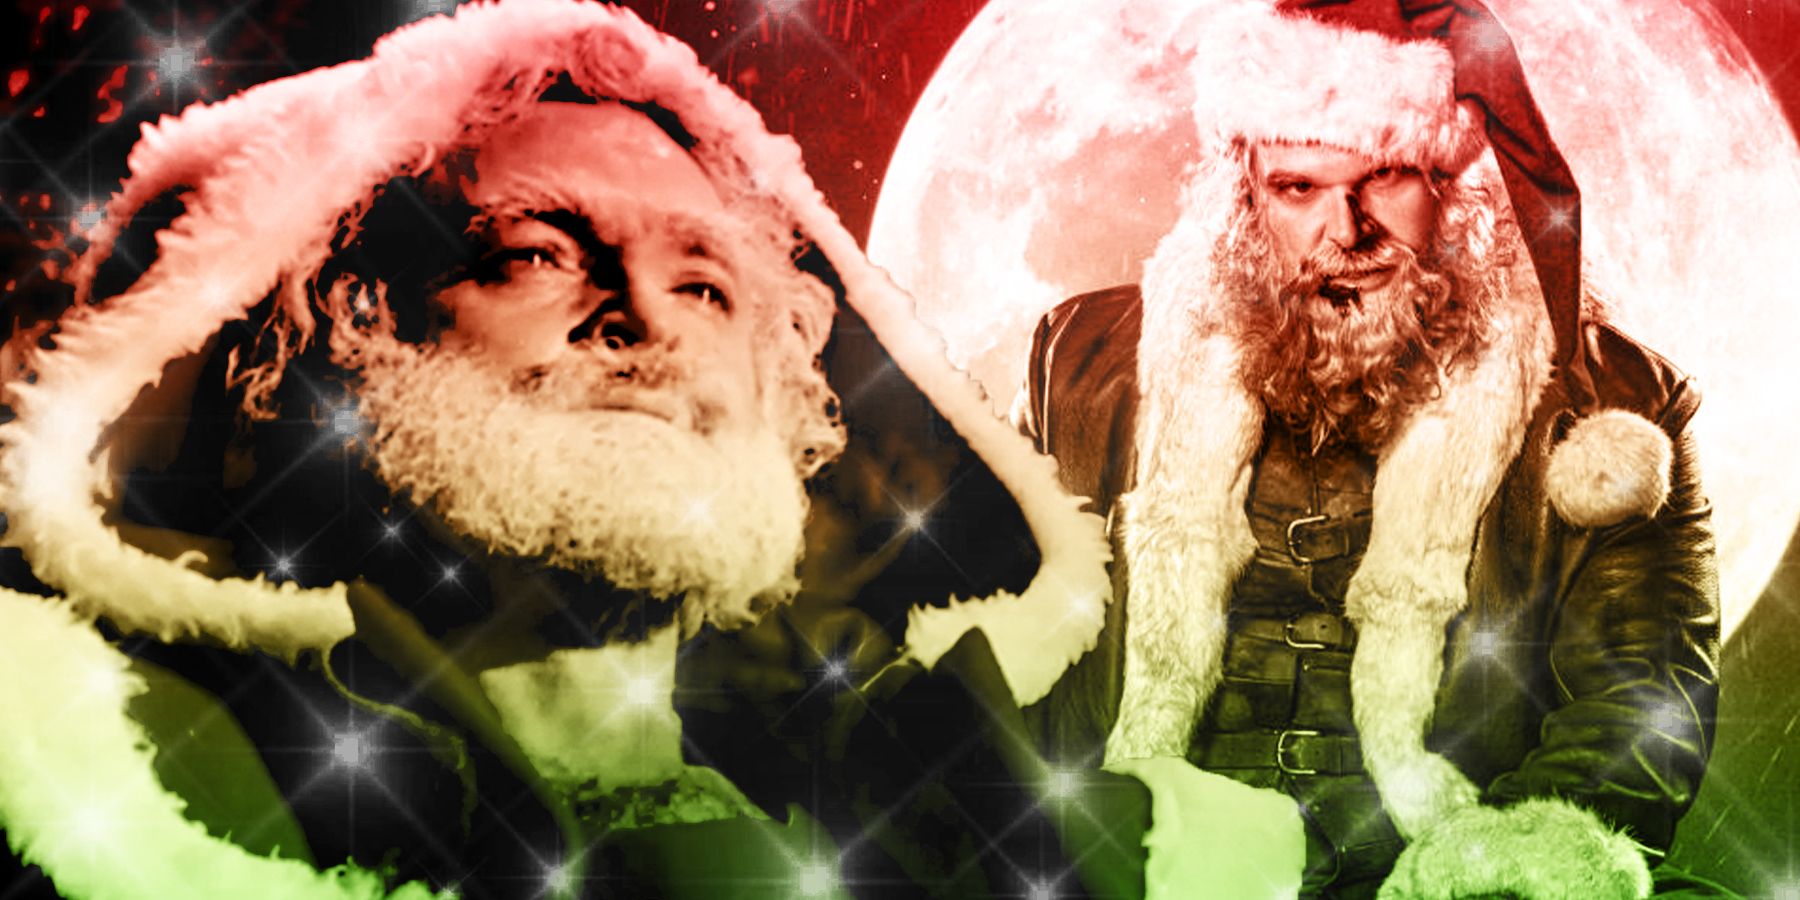 Deadly Games' Pere Noel and Violent Night's disheveled Santa Claus